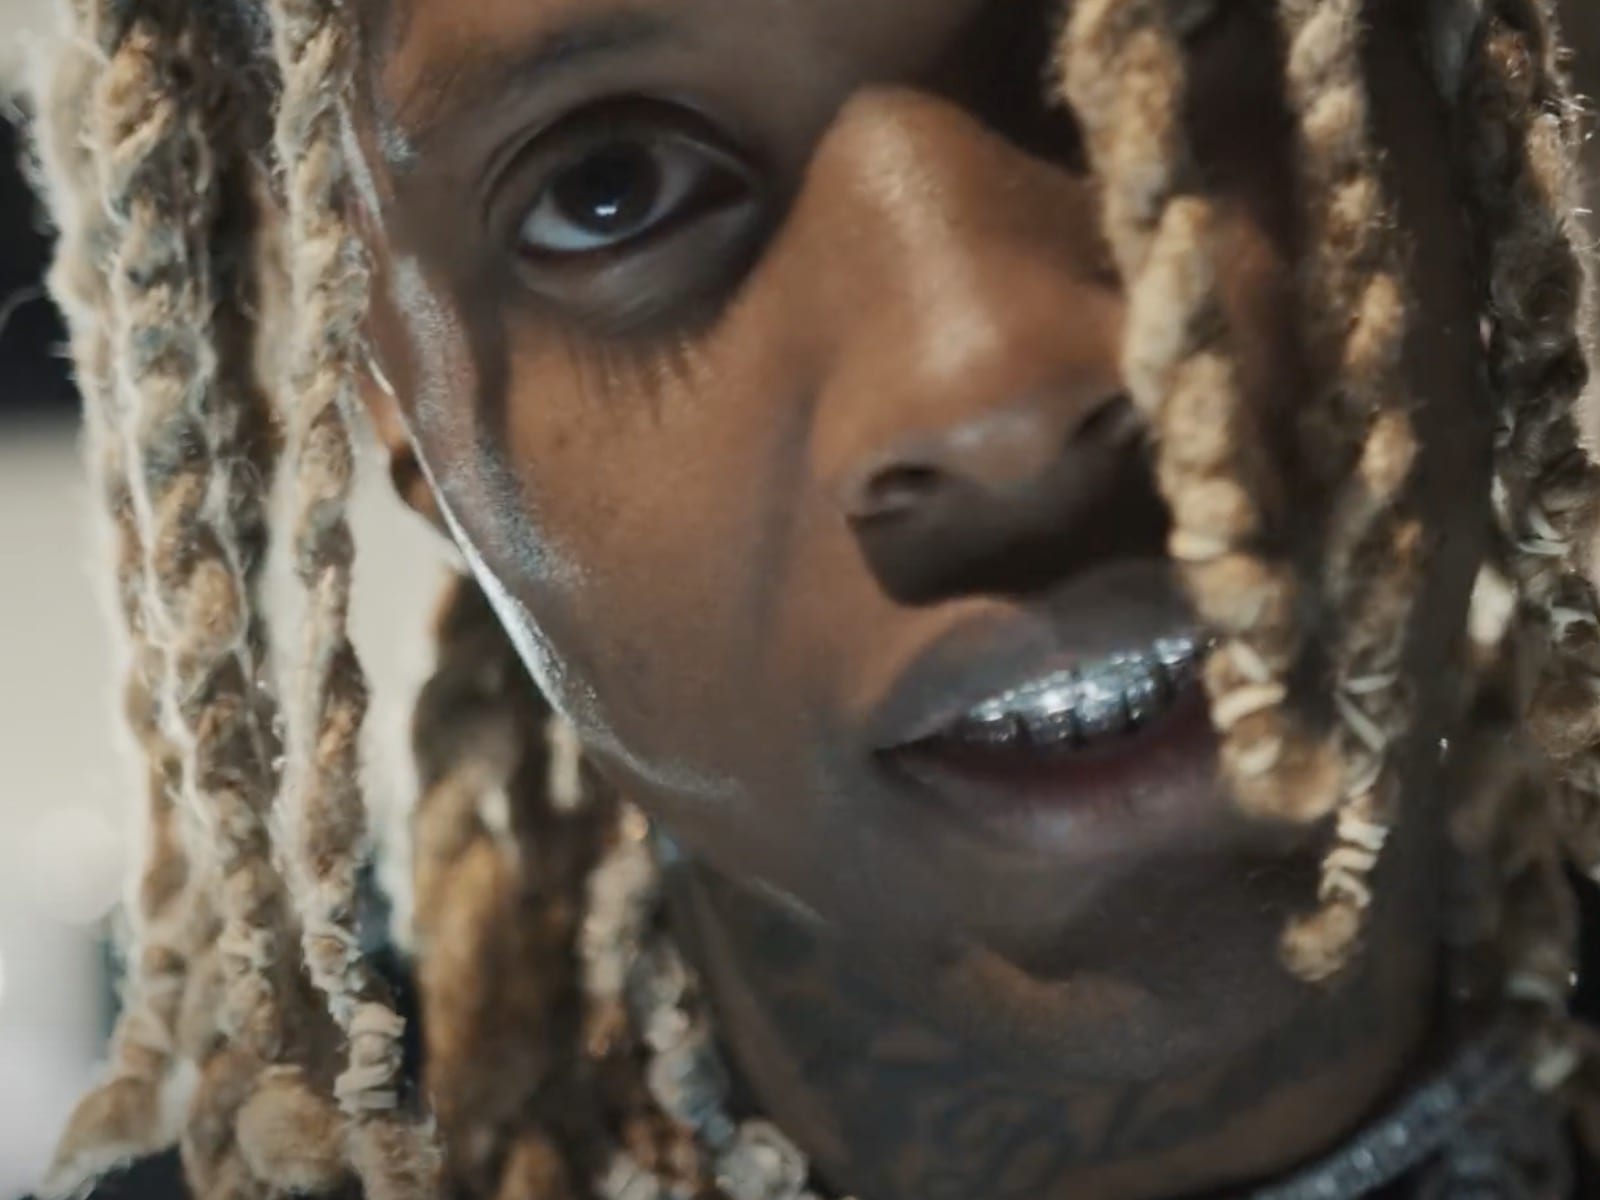 Lil Durk's The Voice Music Video Addresses Hot Topics